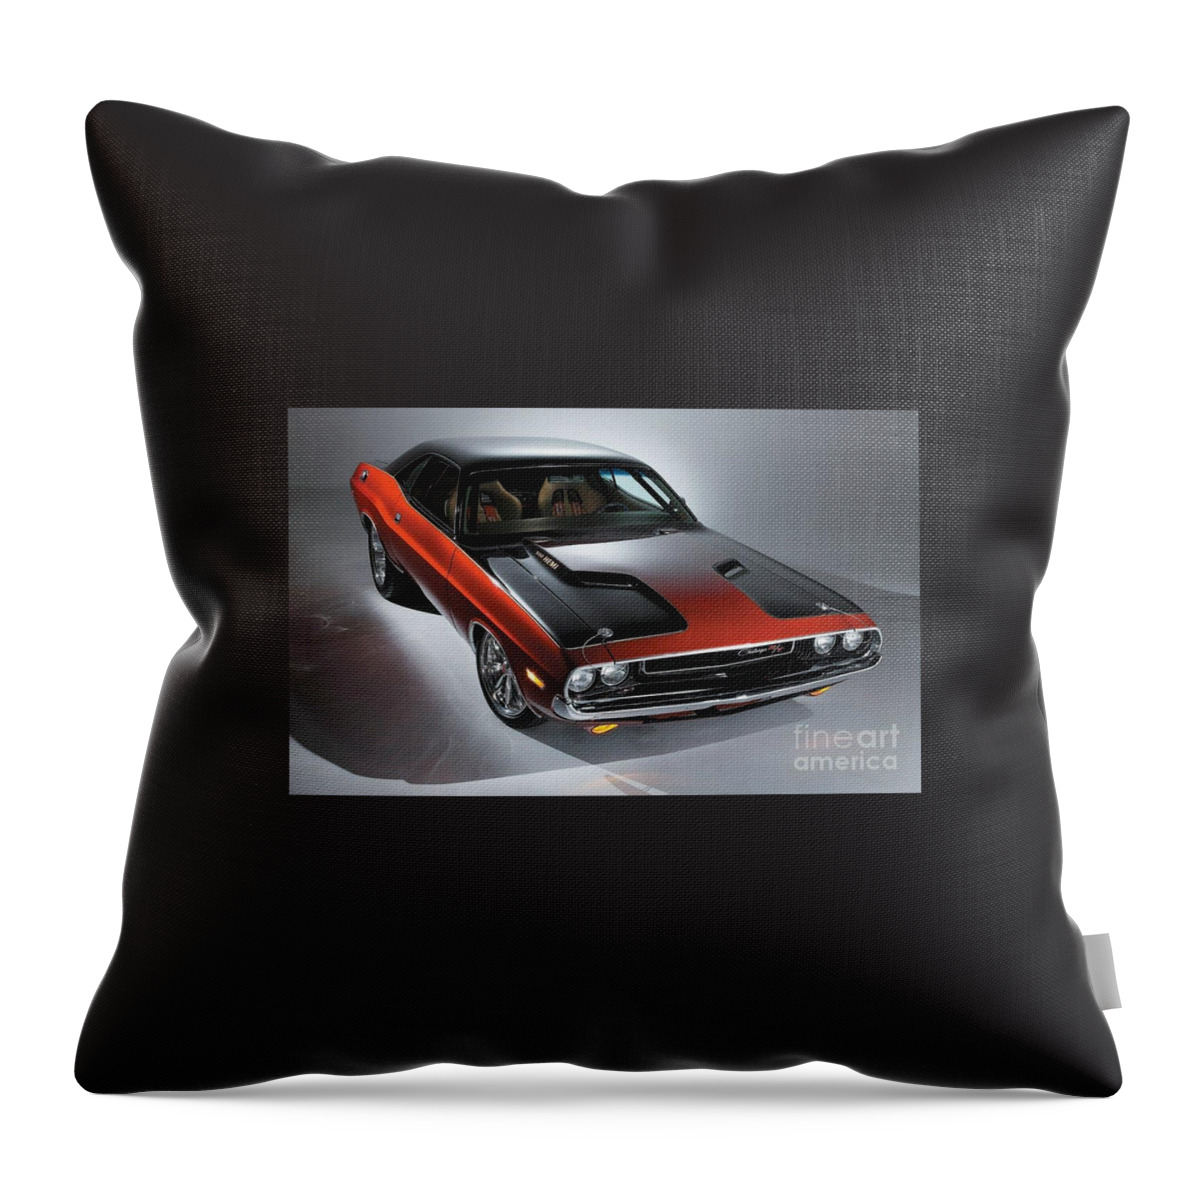 Hemi Throw Pillow featuring the photograph Hemi by Action